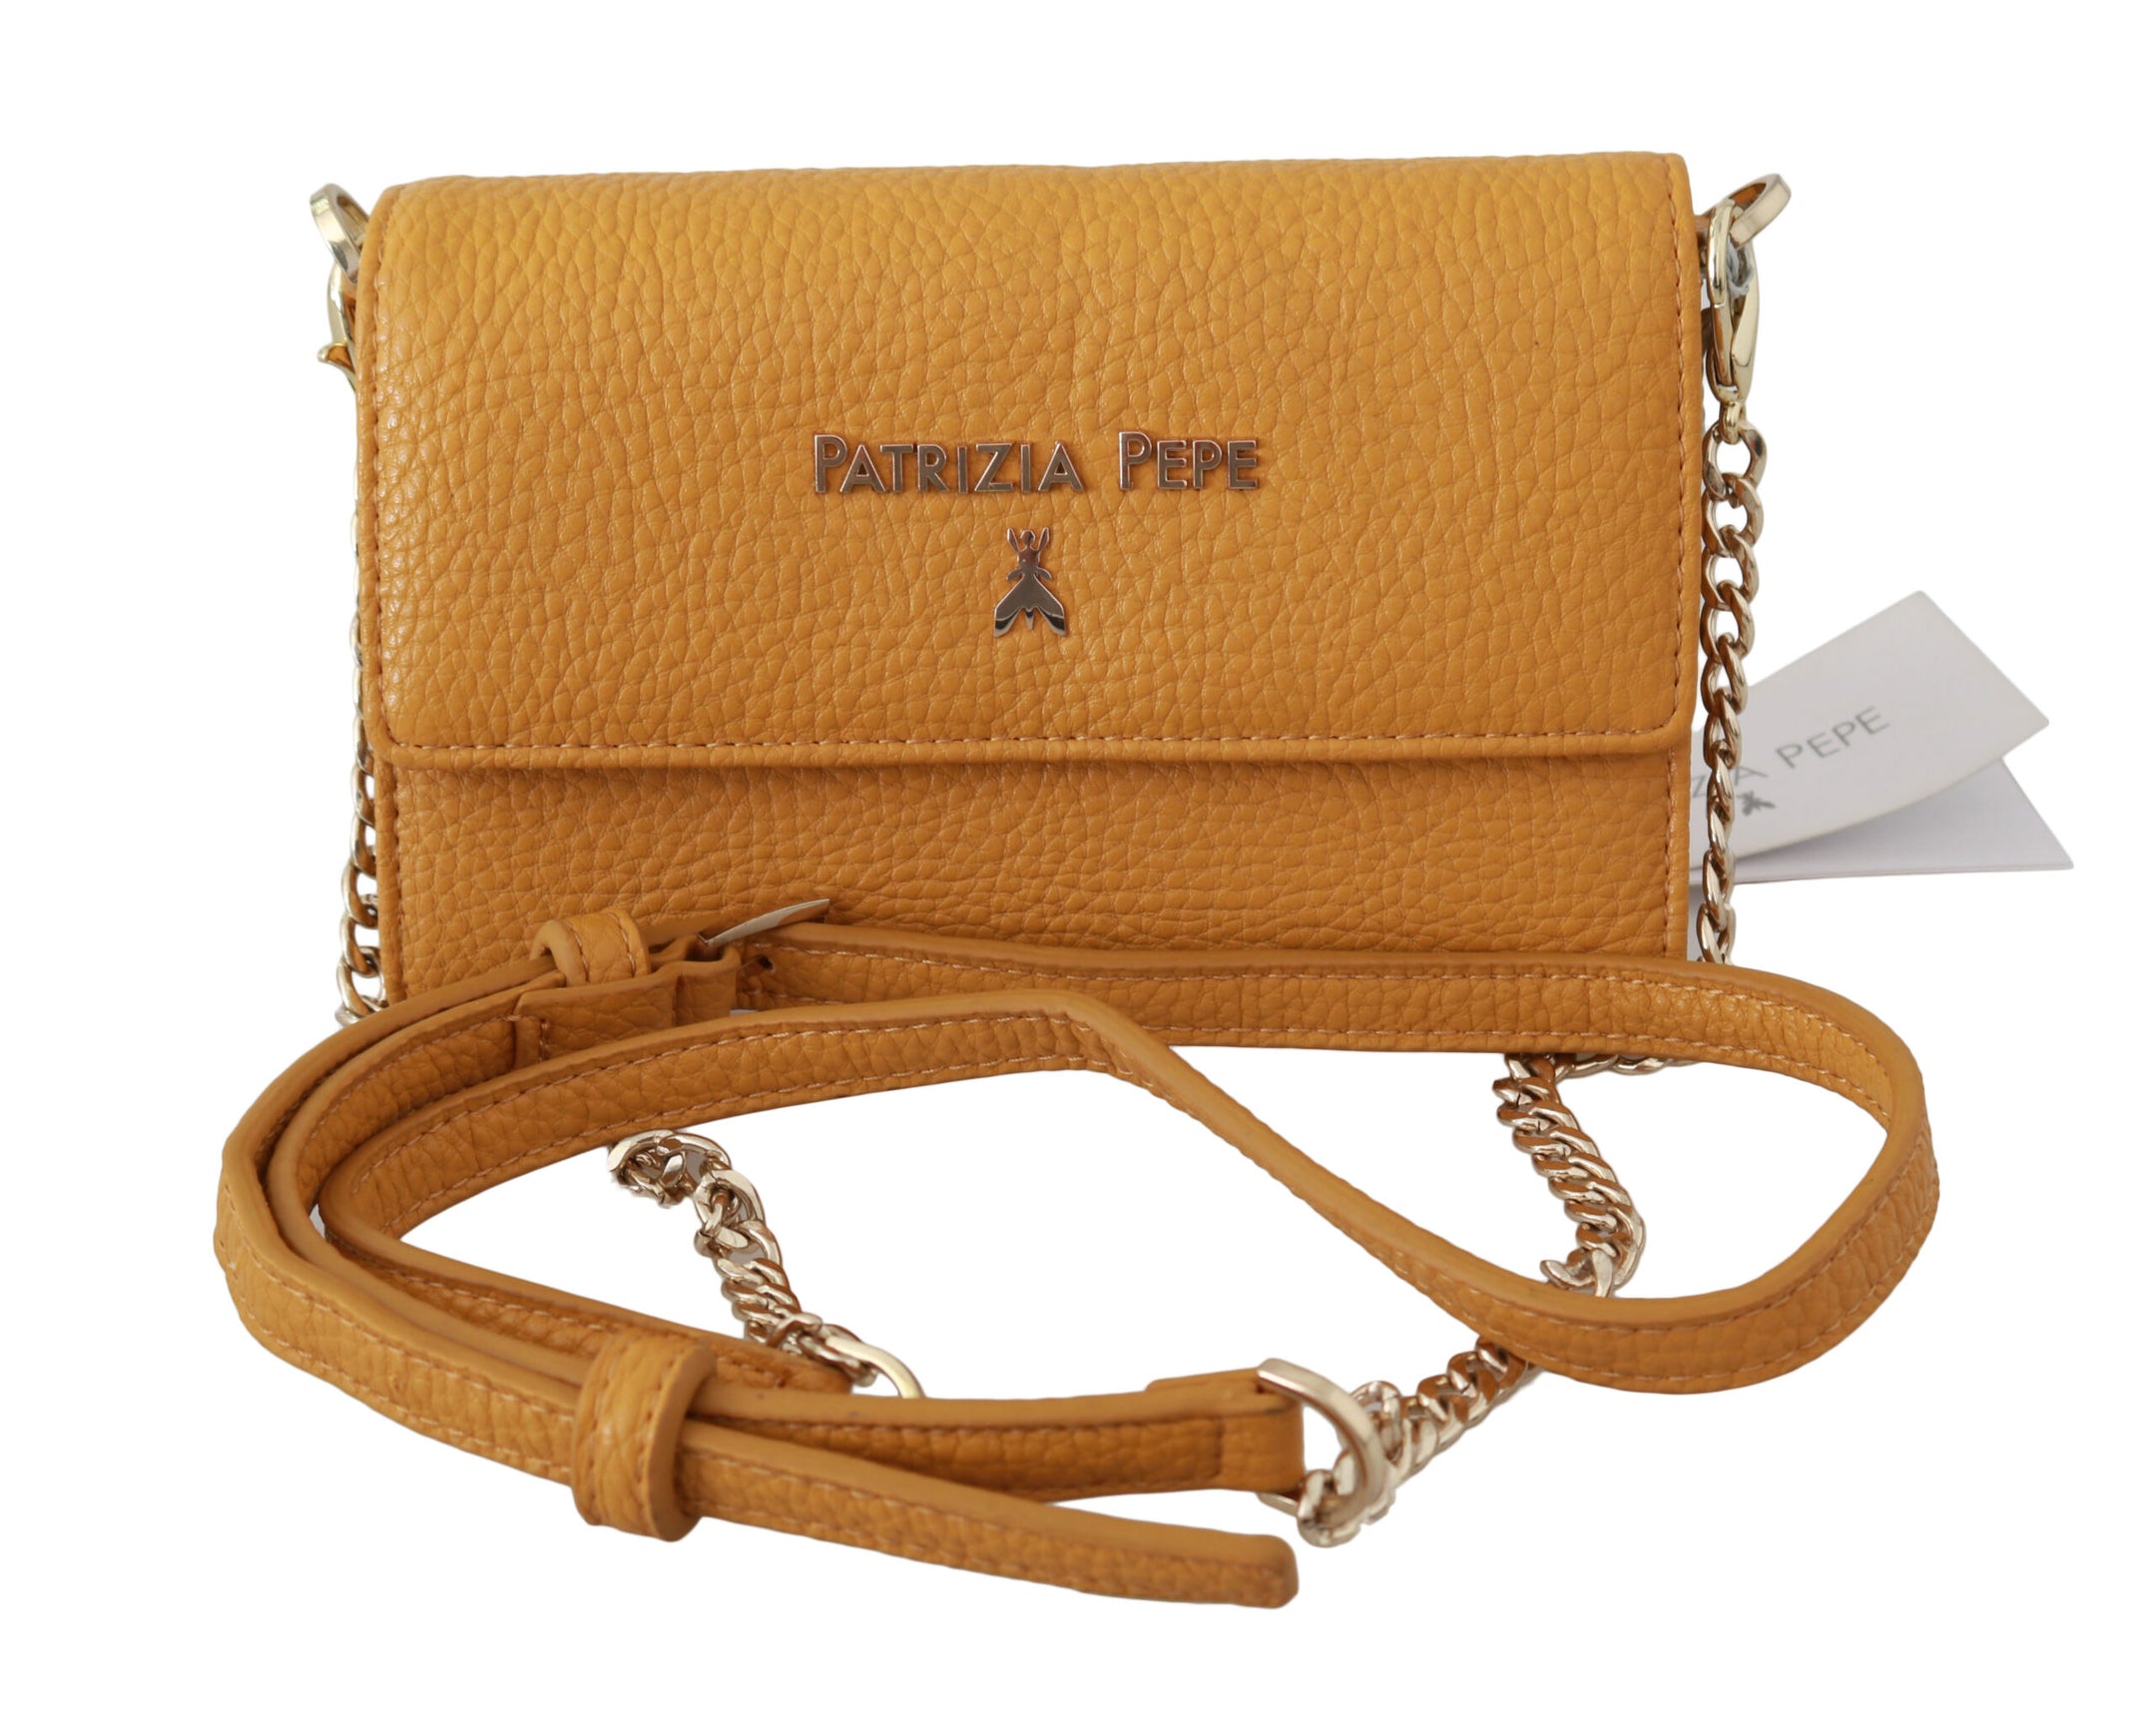 Chic Yellow Leather Shoulder Bag